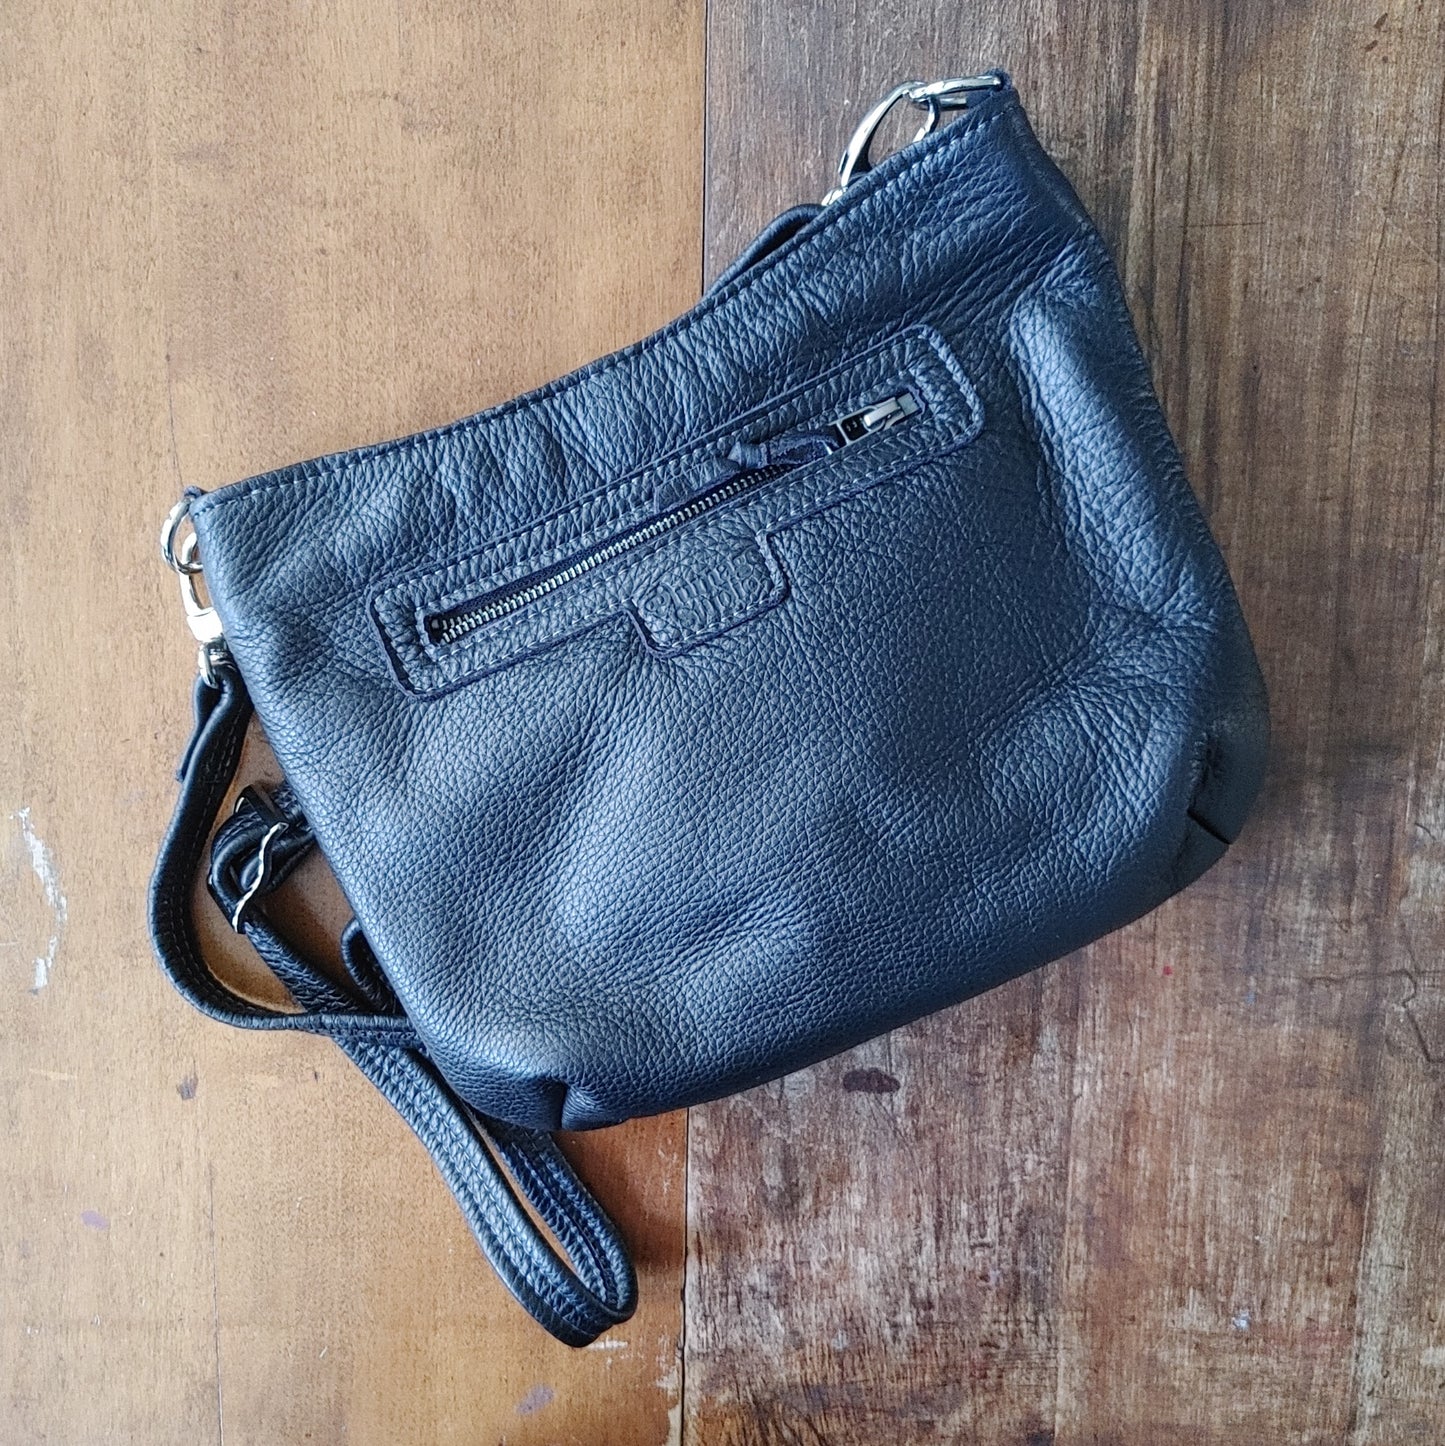 Sway Handbag in Leather and Strawberry Thief